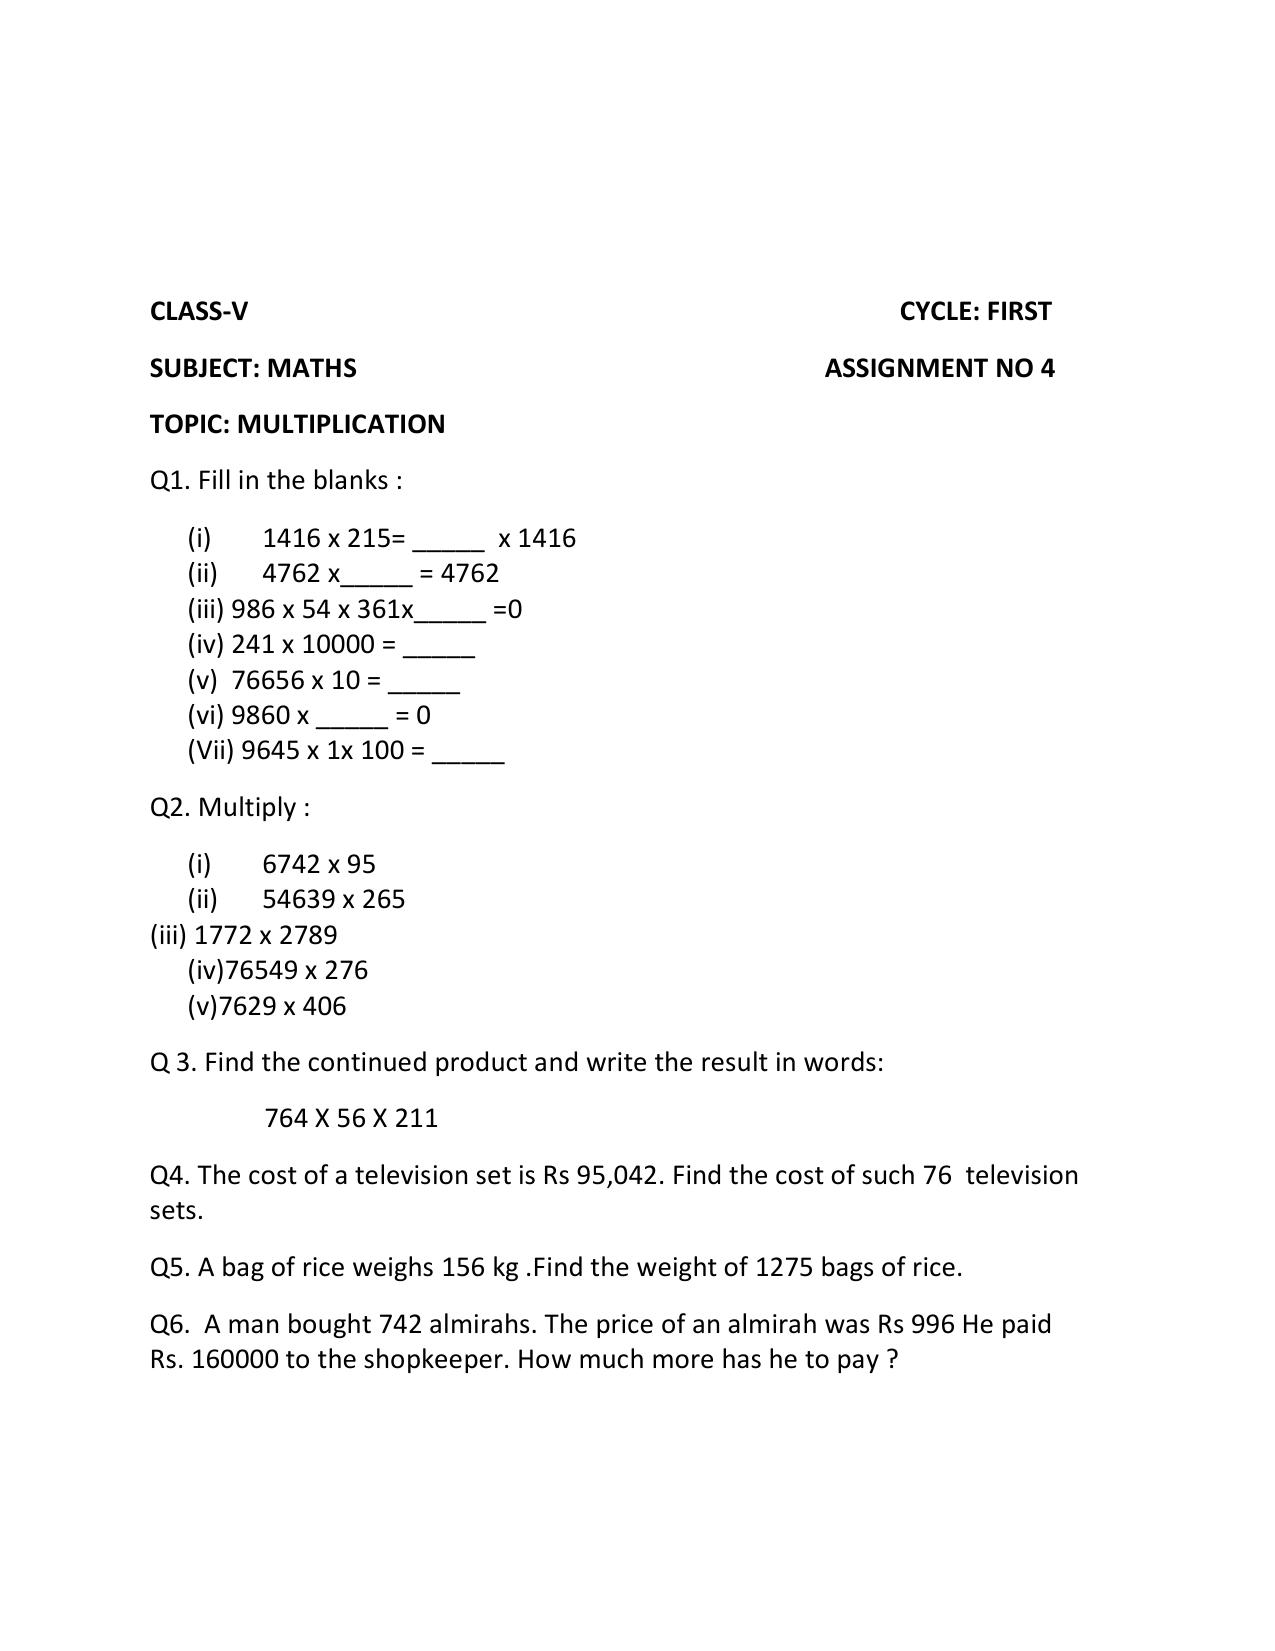 Worksheet for Class 5 Maths Assignment 23 - Page 1